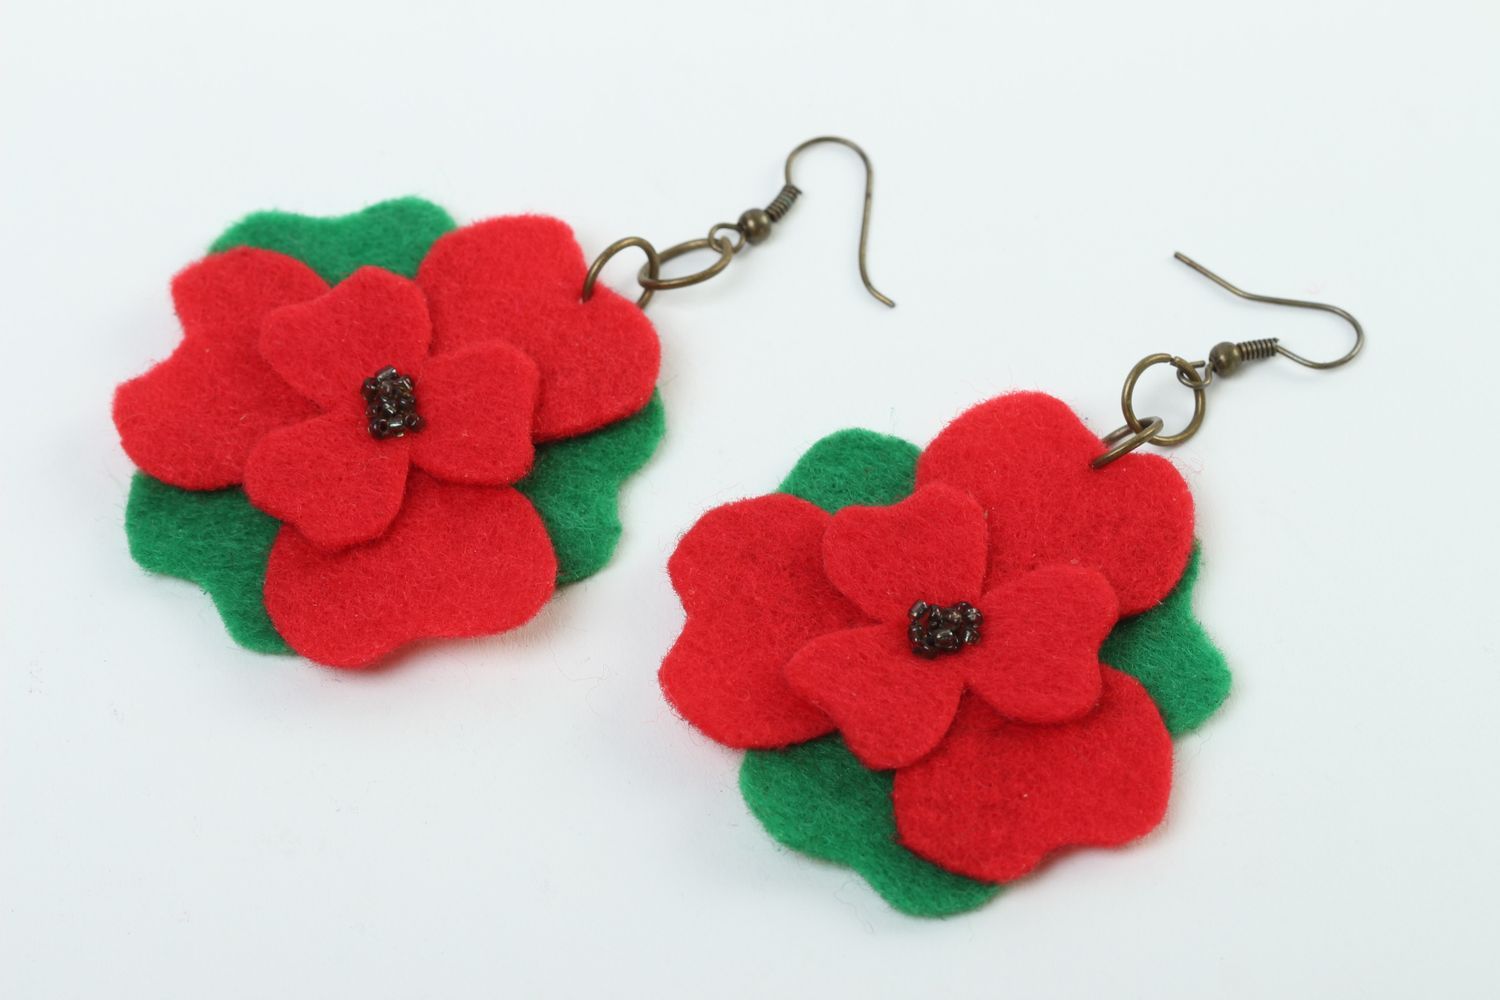 Handmade felted wool earrings fashion accessories for girls needle felting photo 2